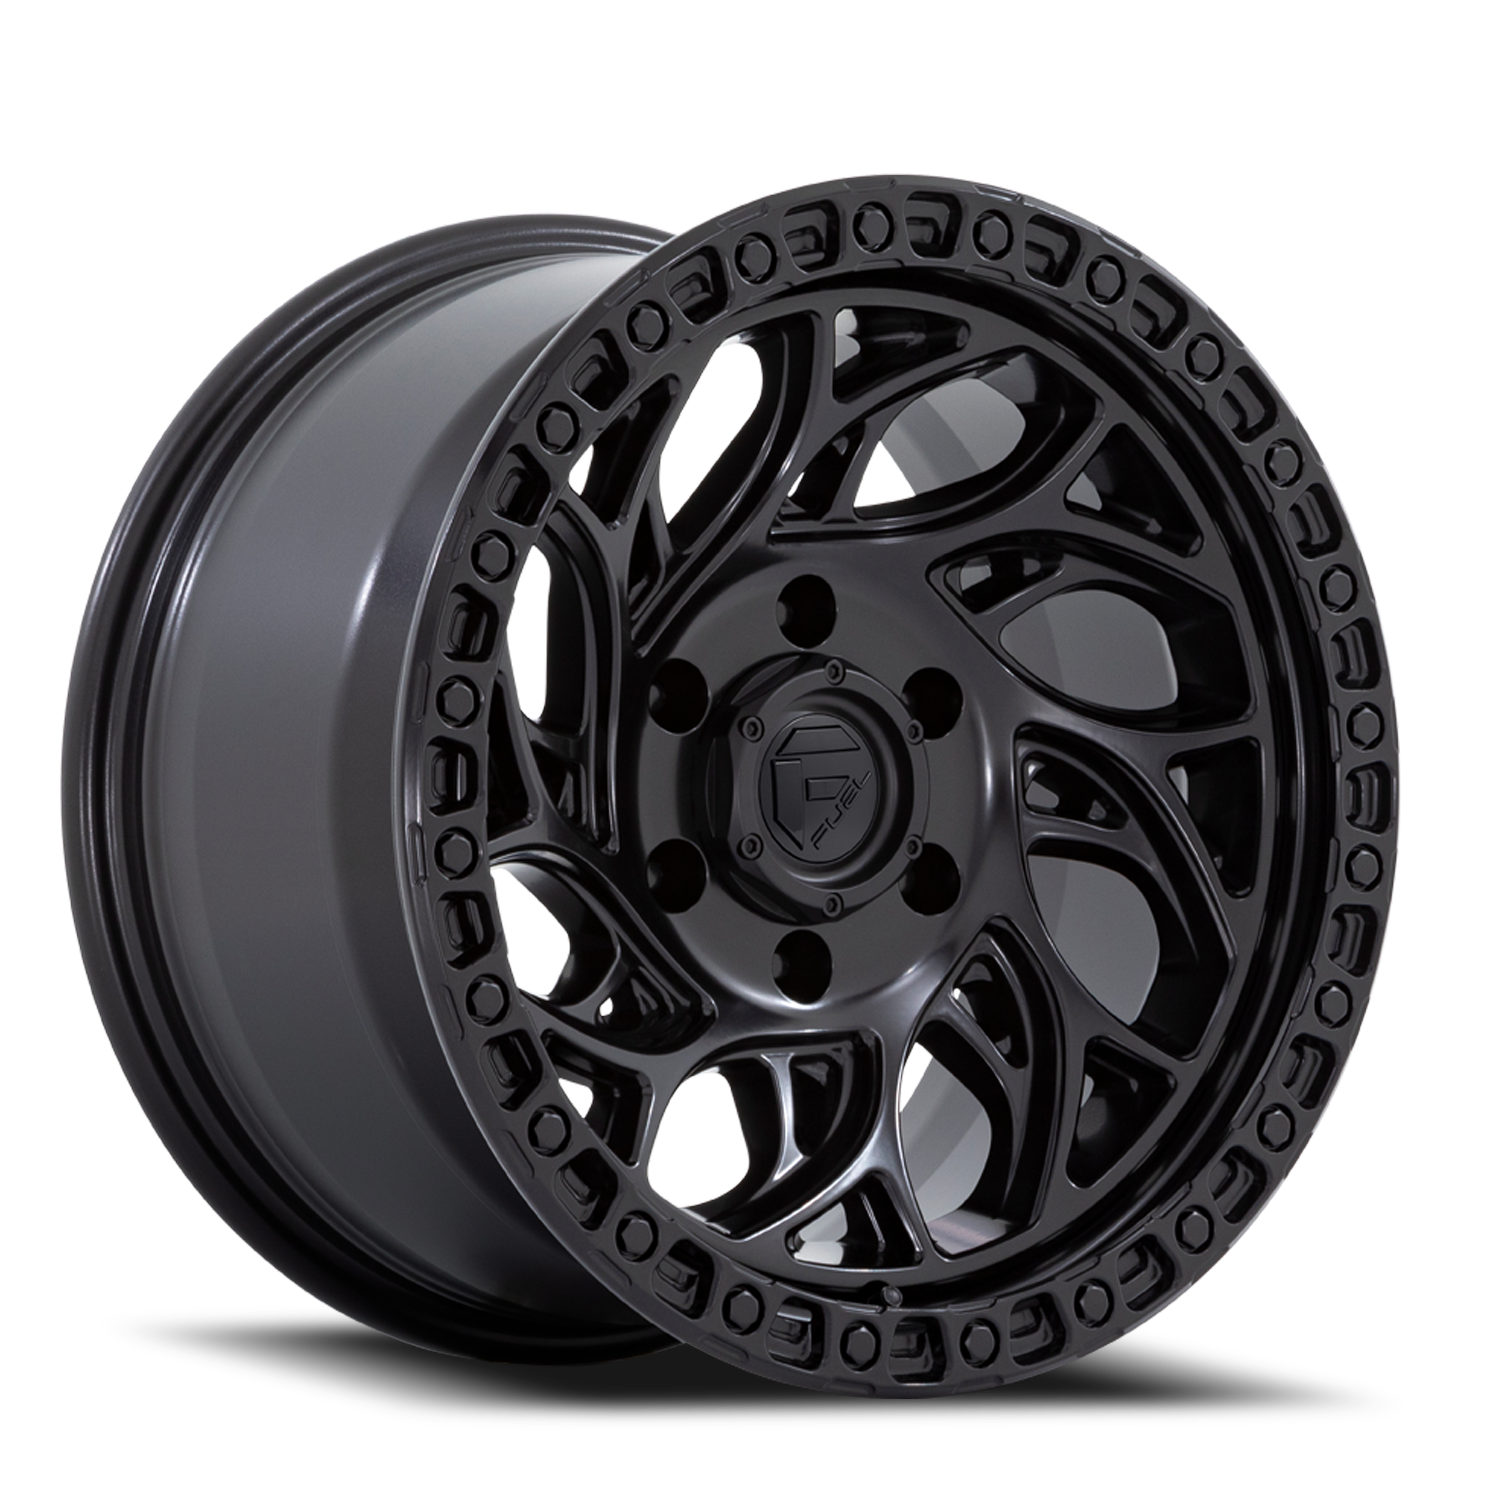 Aluminum Wheels 17X9 Runner OR D852 5 On 150 Blackout 110.1 Bore -12 Offset Fuel Off Road Wheels